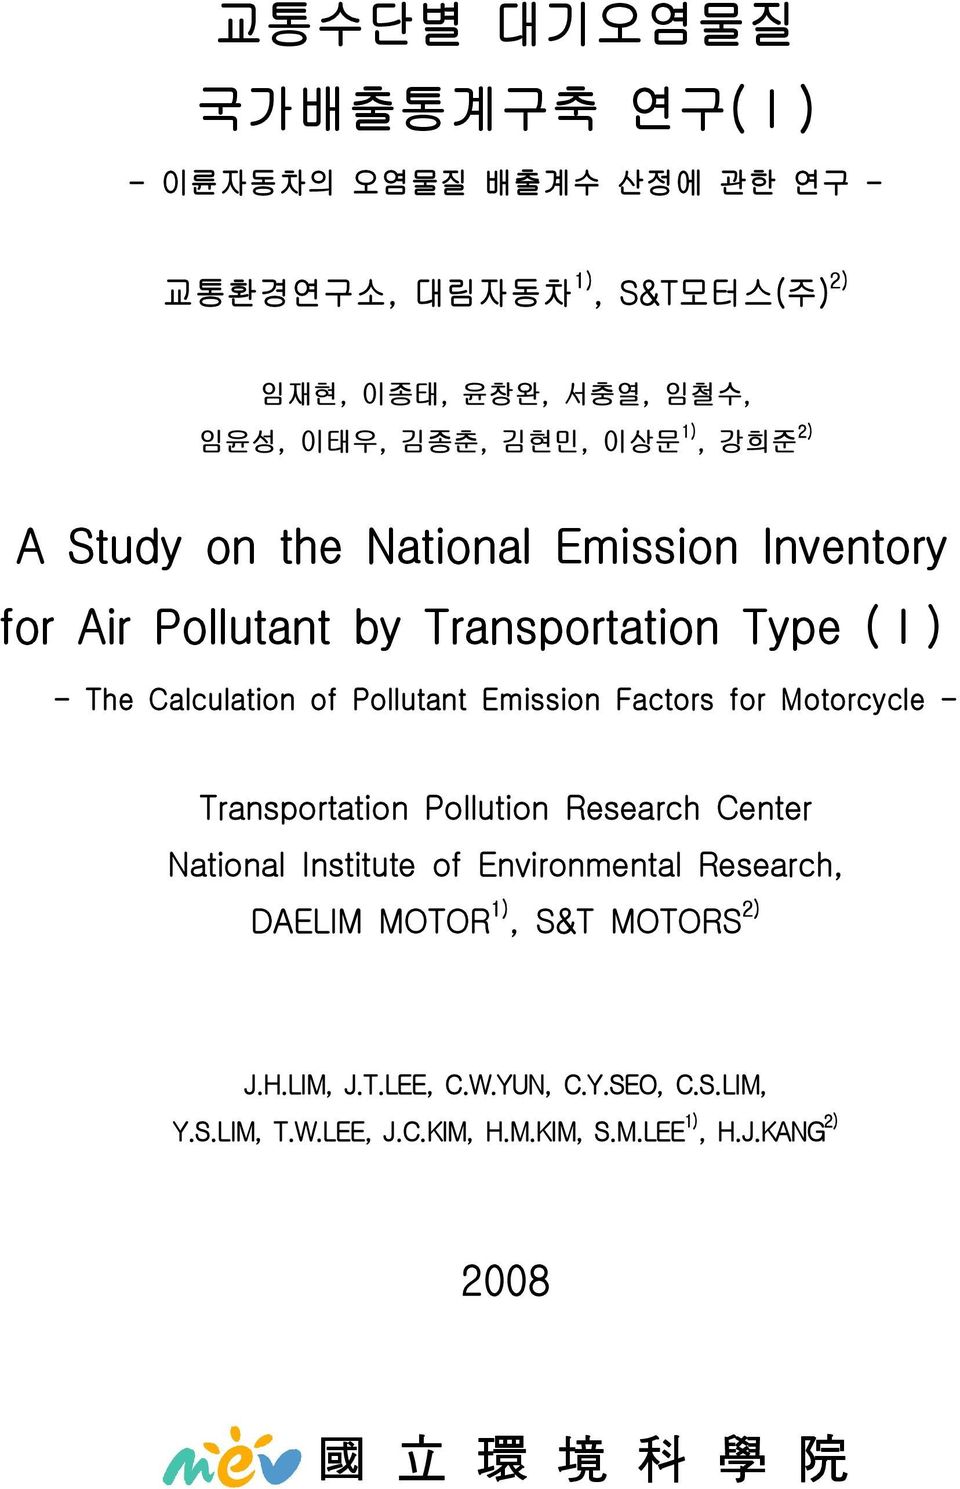 Emission Factors for Motorcycle - Transportation Pollution Research Center National Institute of Environmental Research, DAELIM MOTOR